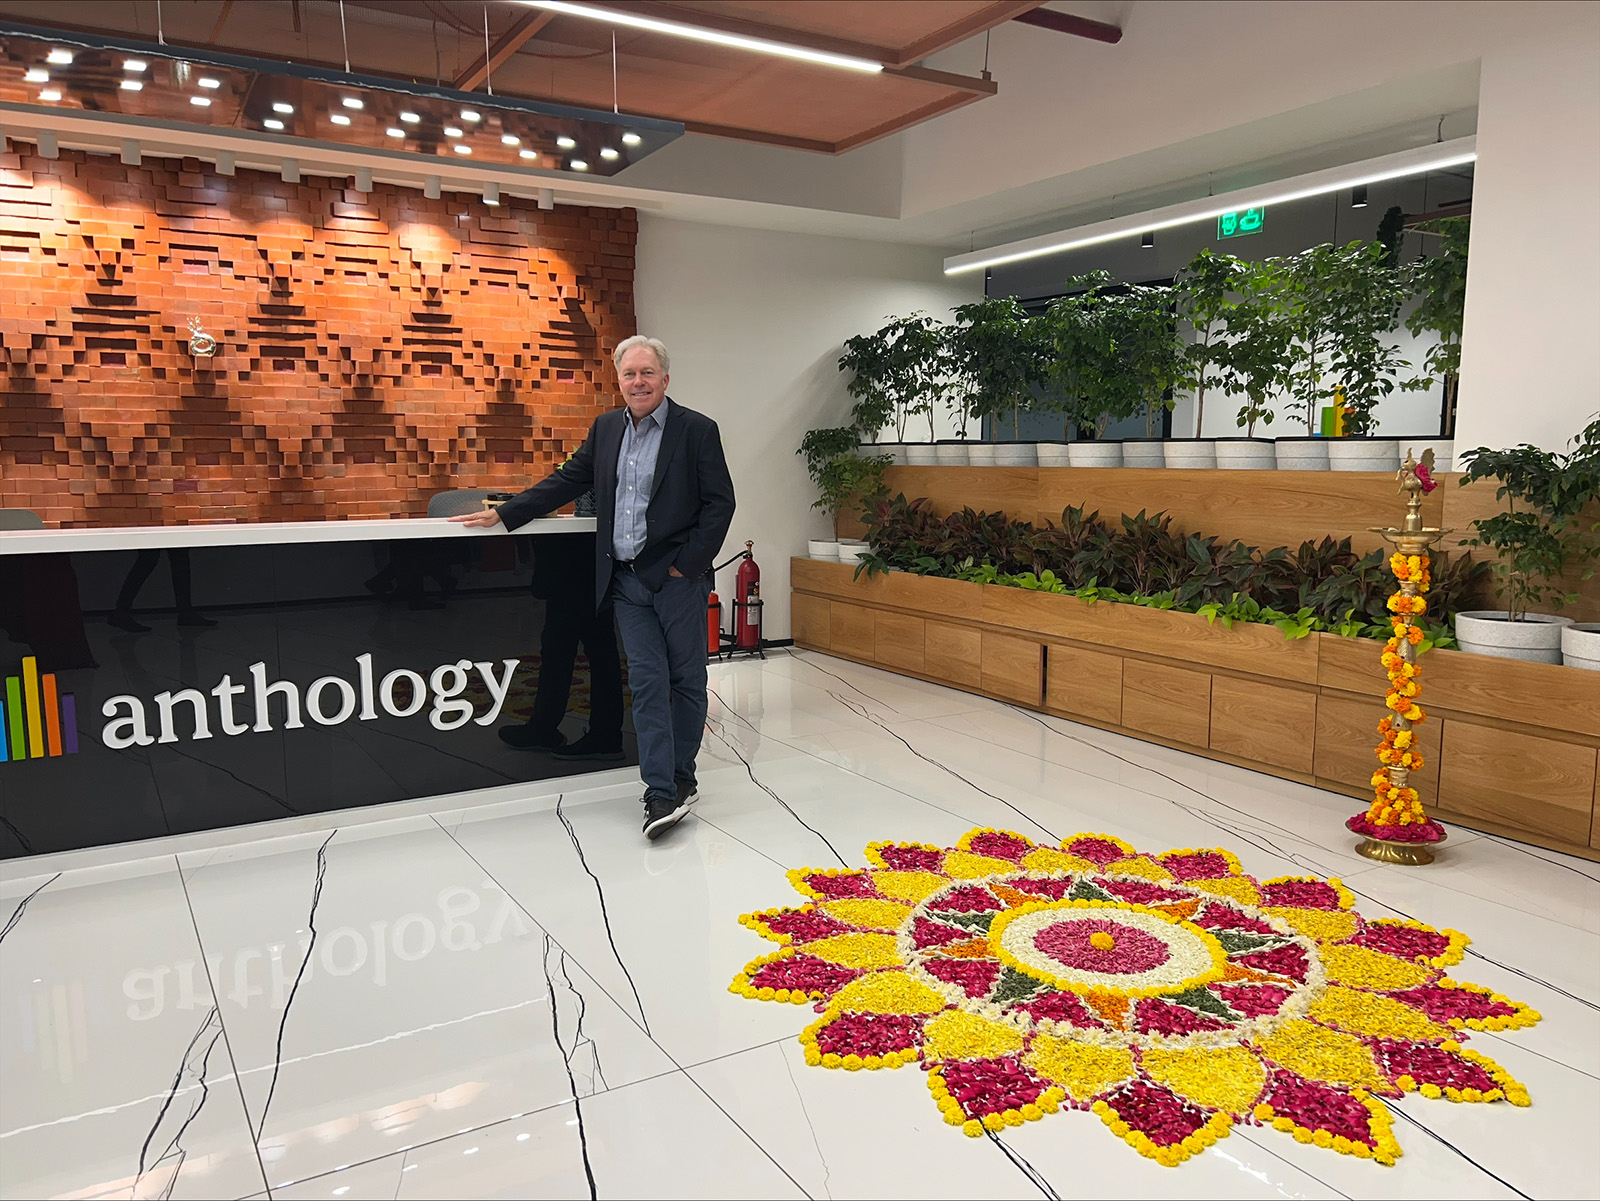 Photo of Anthology CEO Bruce Dahlgren in the India office